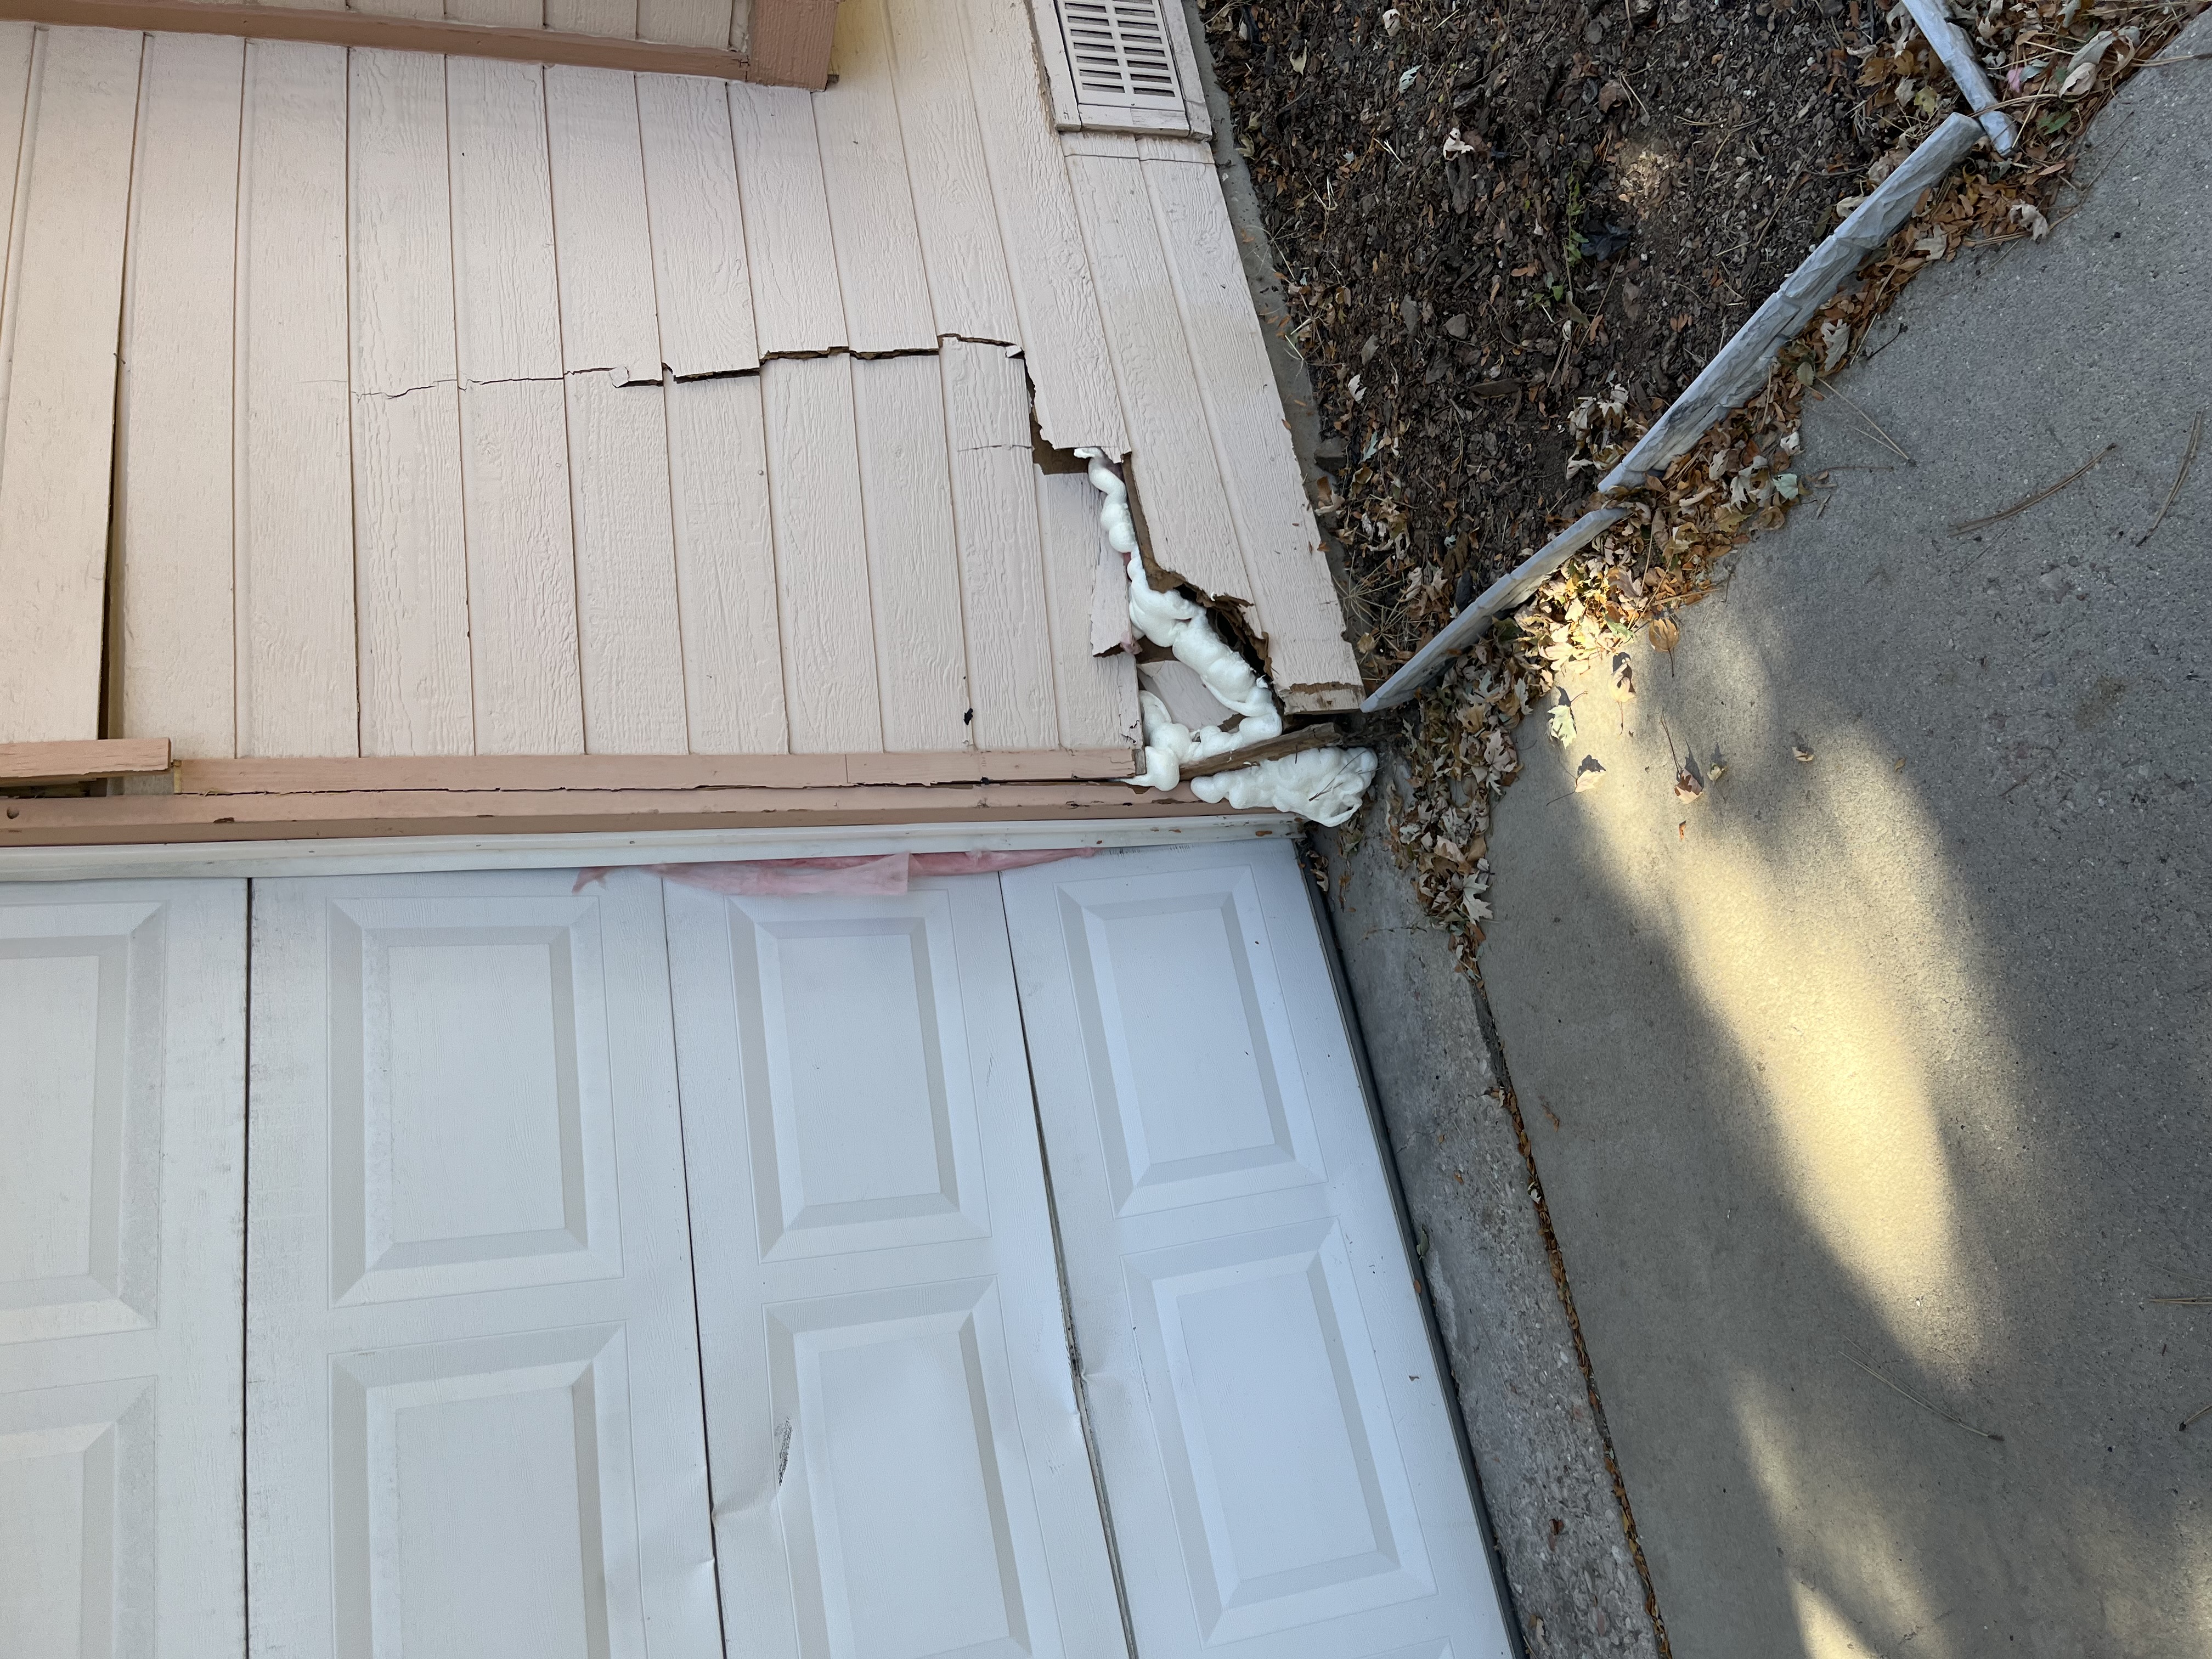 Crack in the siding and garage door damage